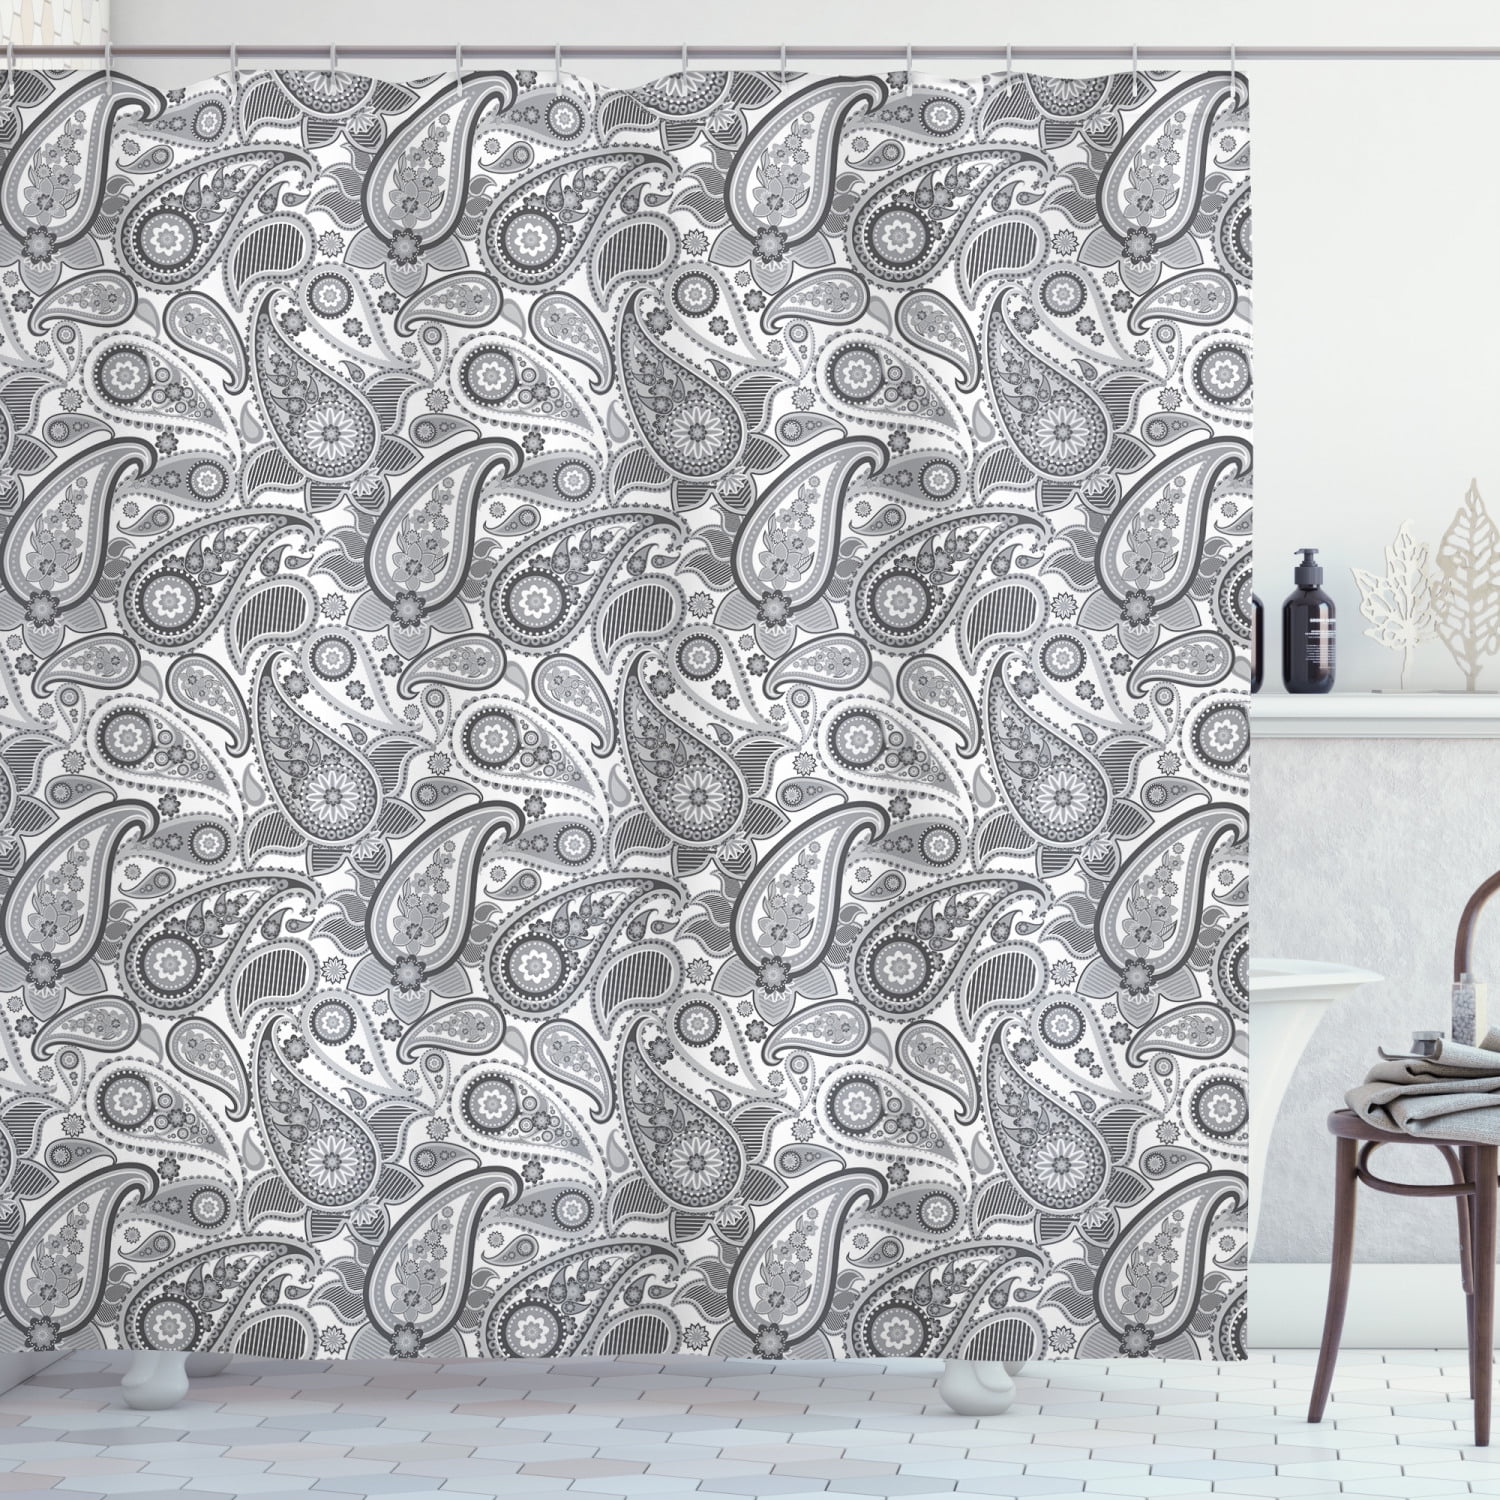 Paisley Shower Curtain, Soft Digital Traditional Persian Ornate Leaf ...